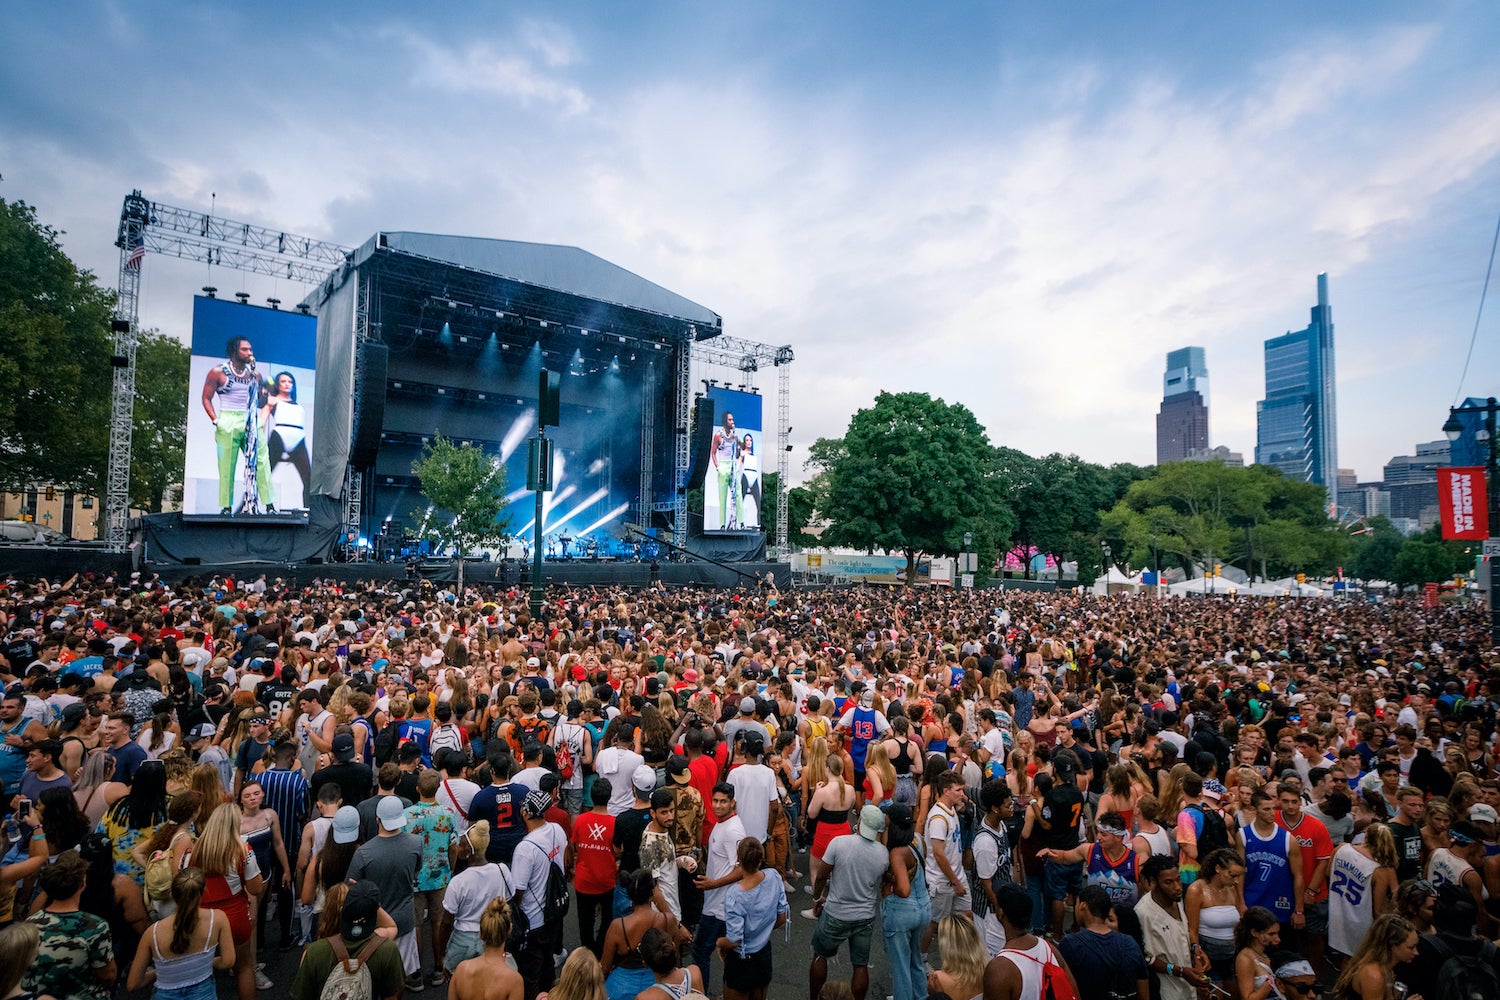 Made in America returns to Ben Franklin Parkway in 2021 - WHYY